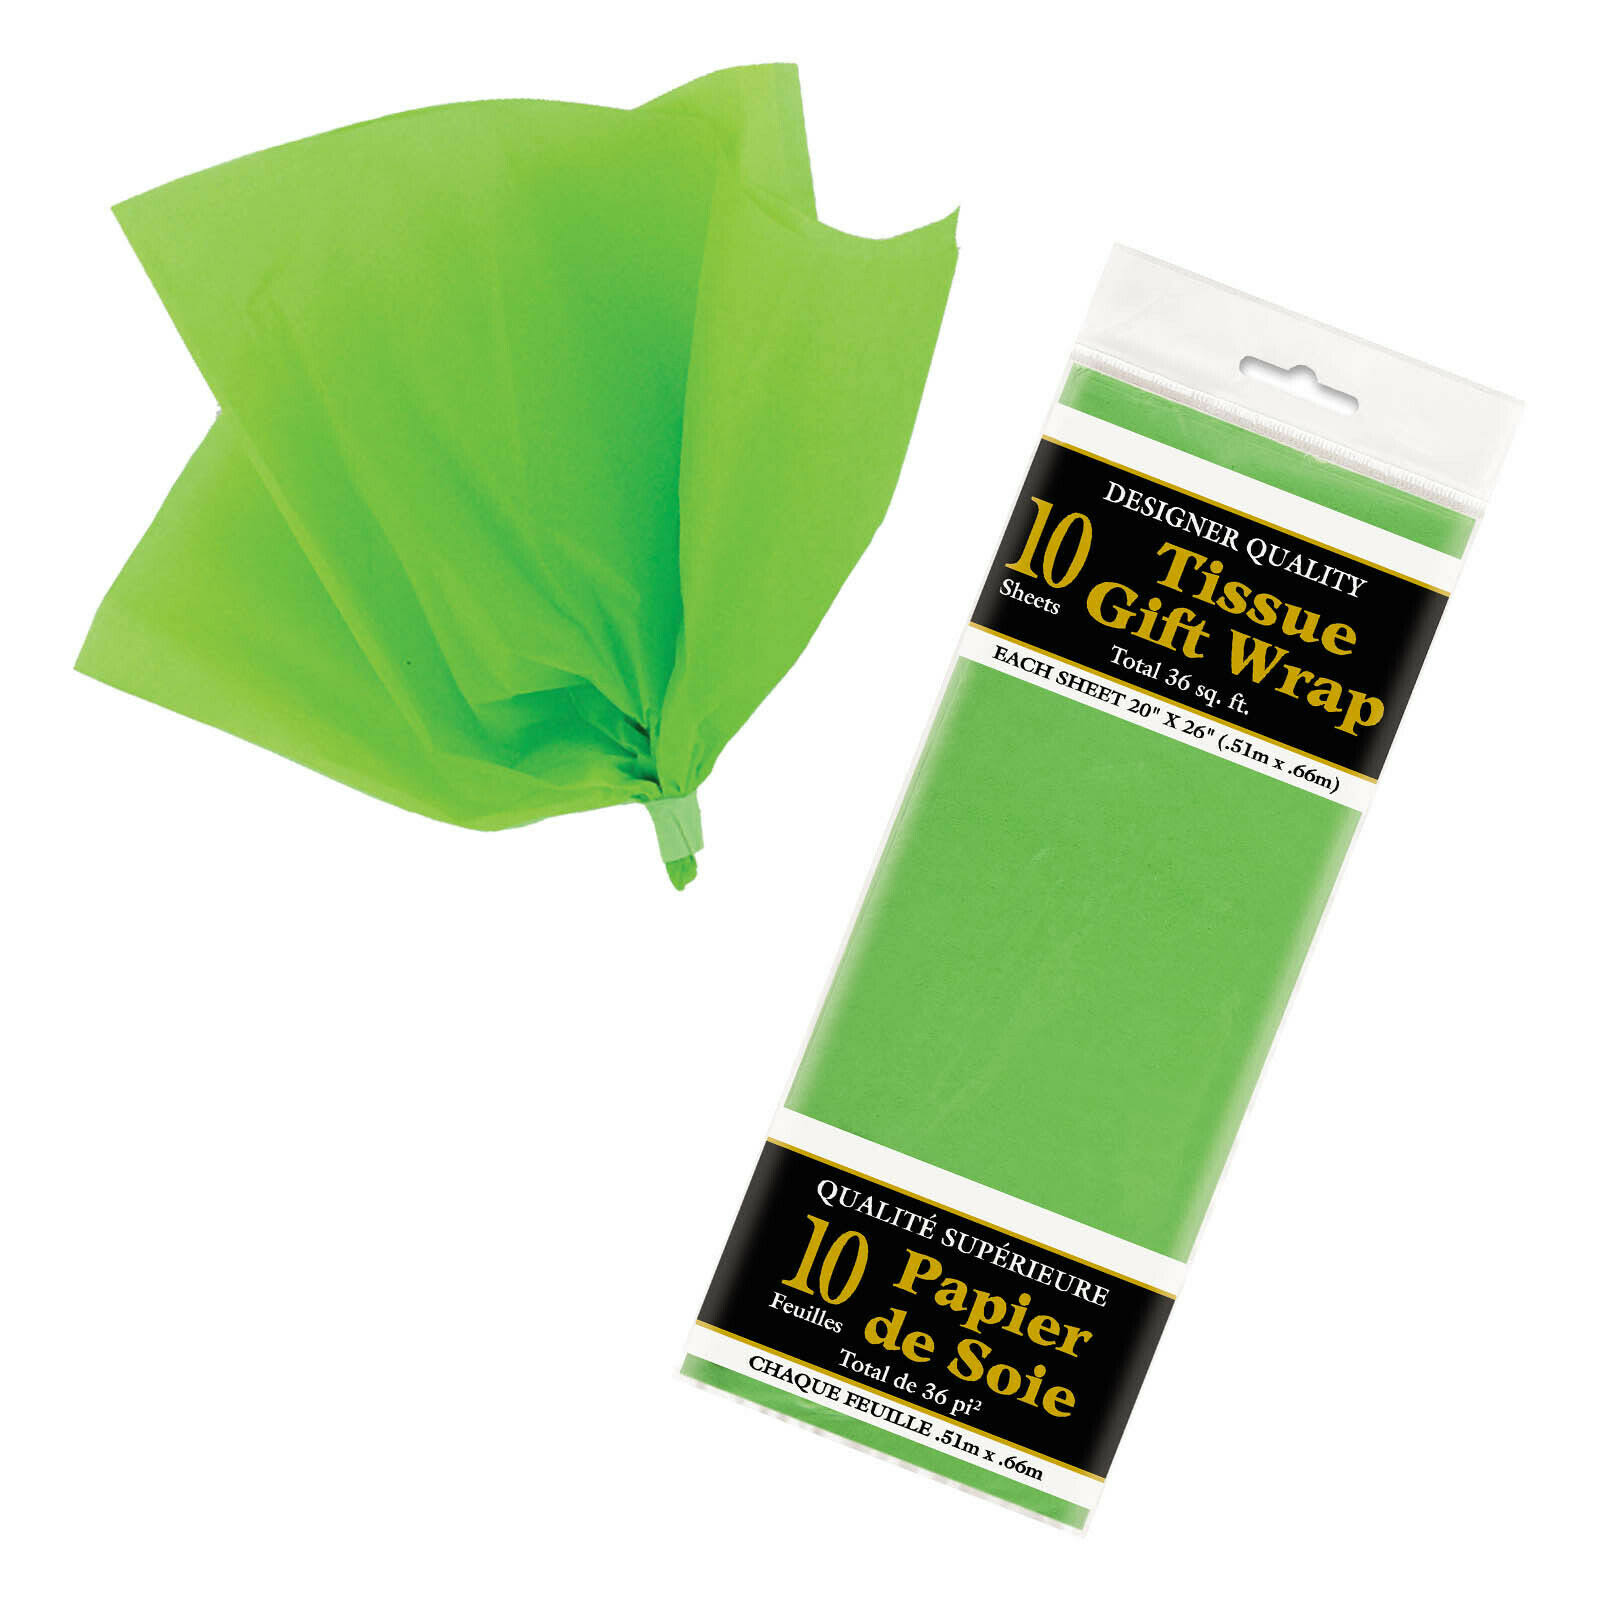 Unique Industries Tissue Gift Wrap - Lime Green, 10 Sheets